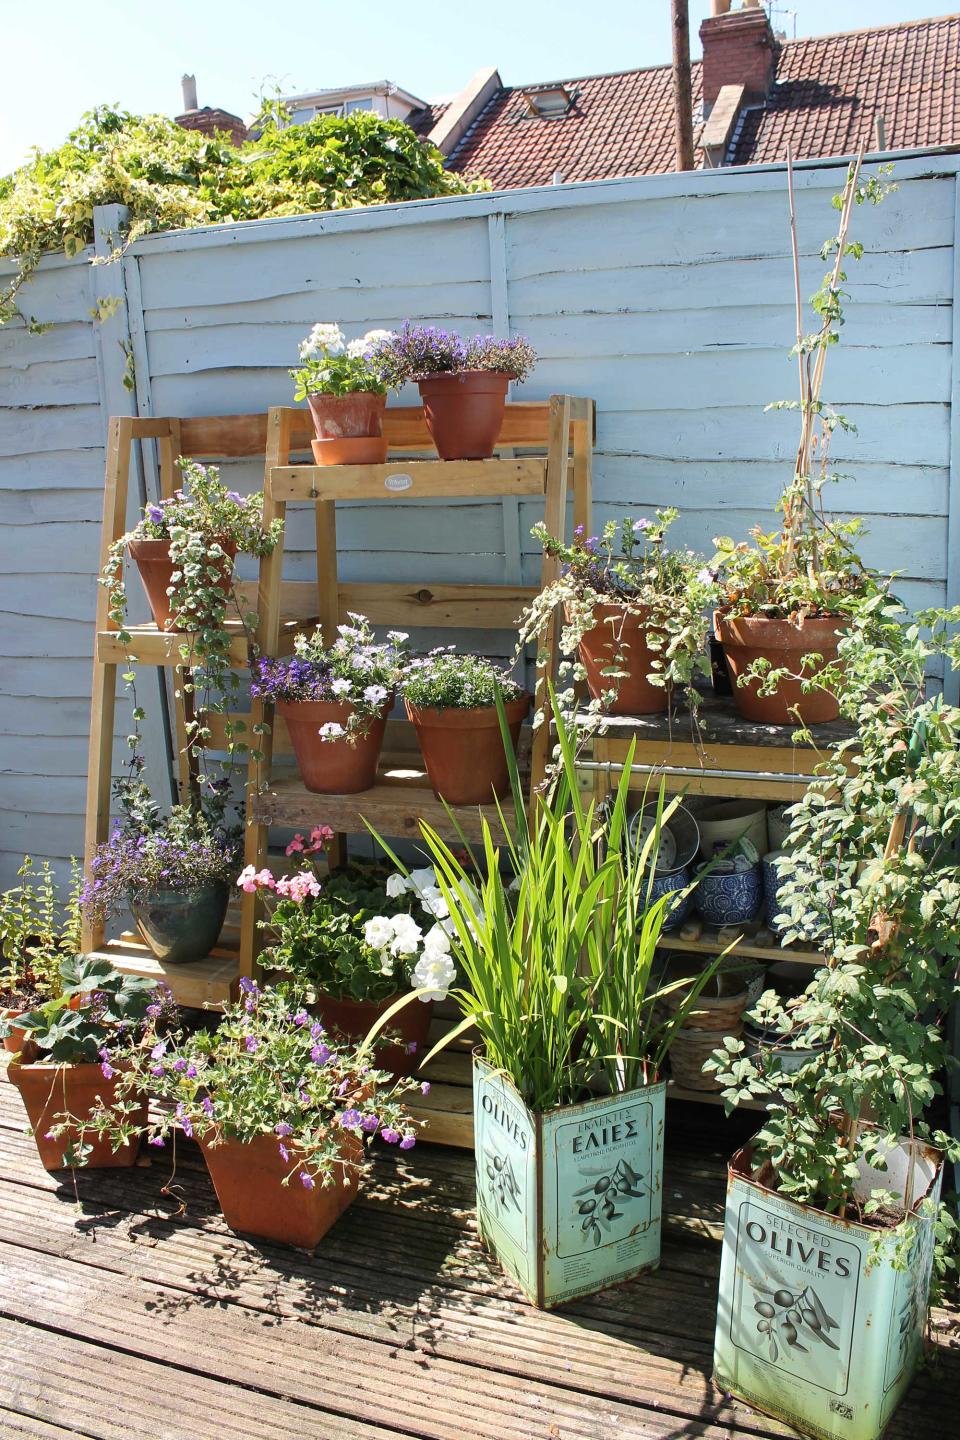 11. Set the scene for your container garden